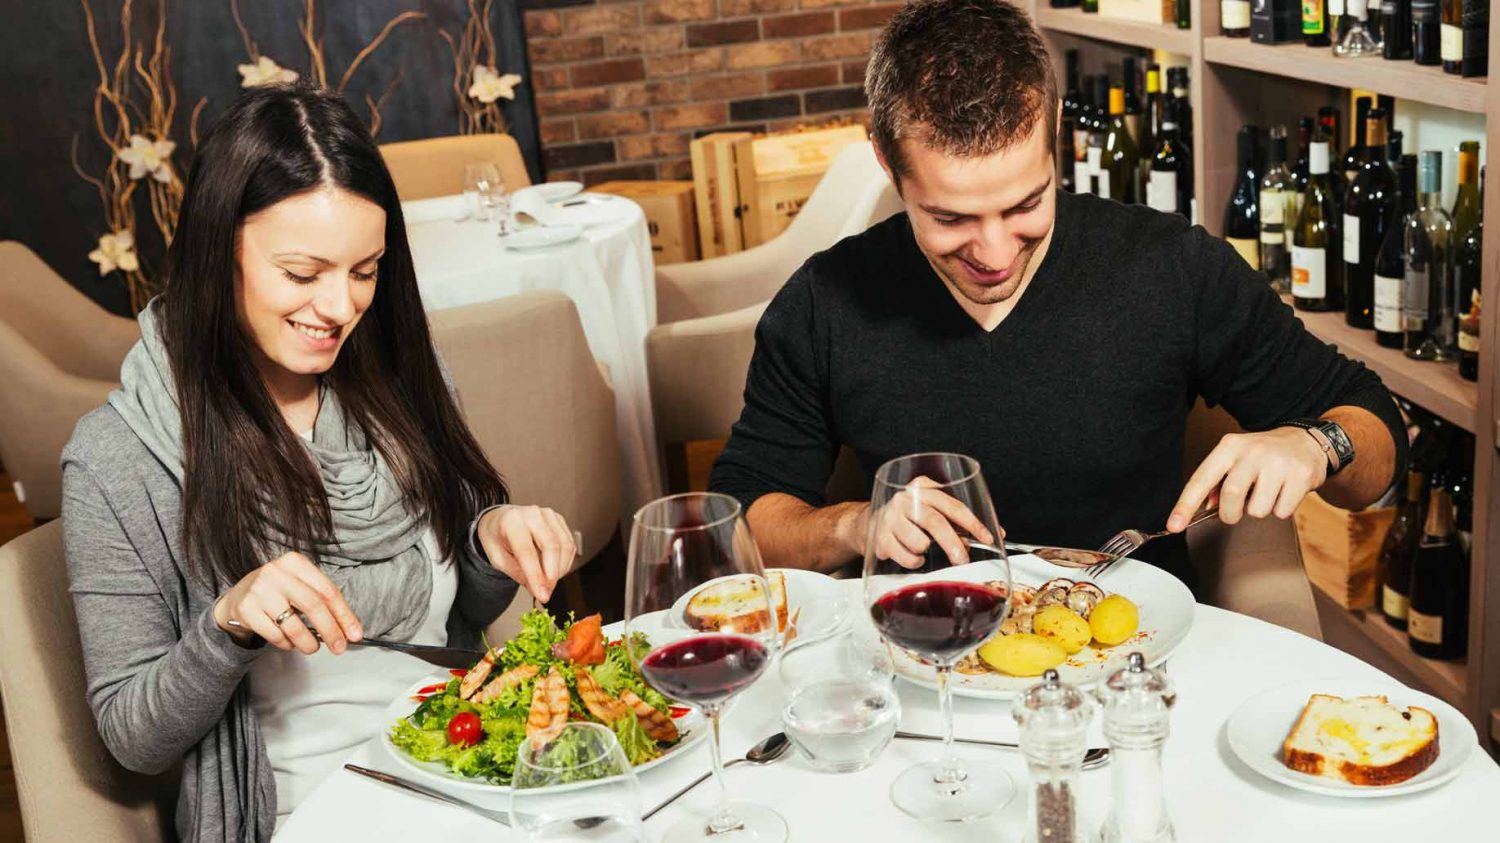 Plan a Perfect Date and We’ll Hook You up With a Hot Celeb Boyfriend! couple having dinner restaunt